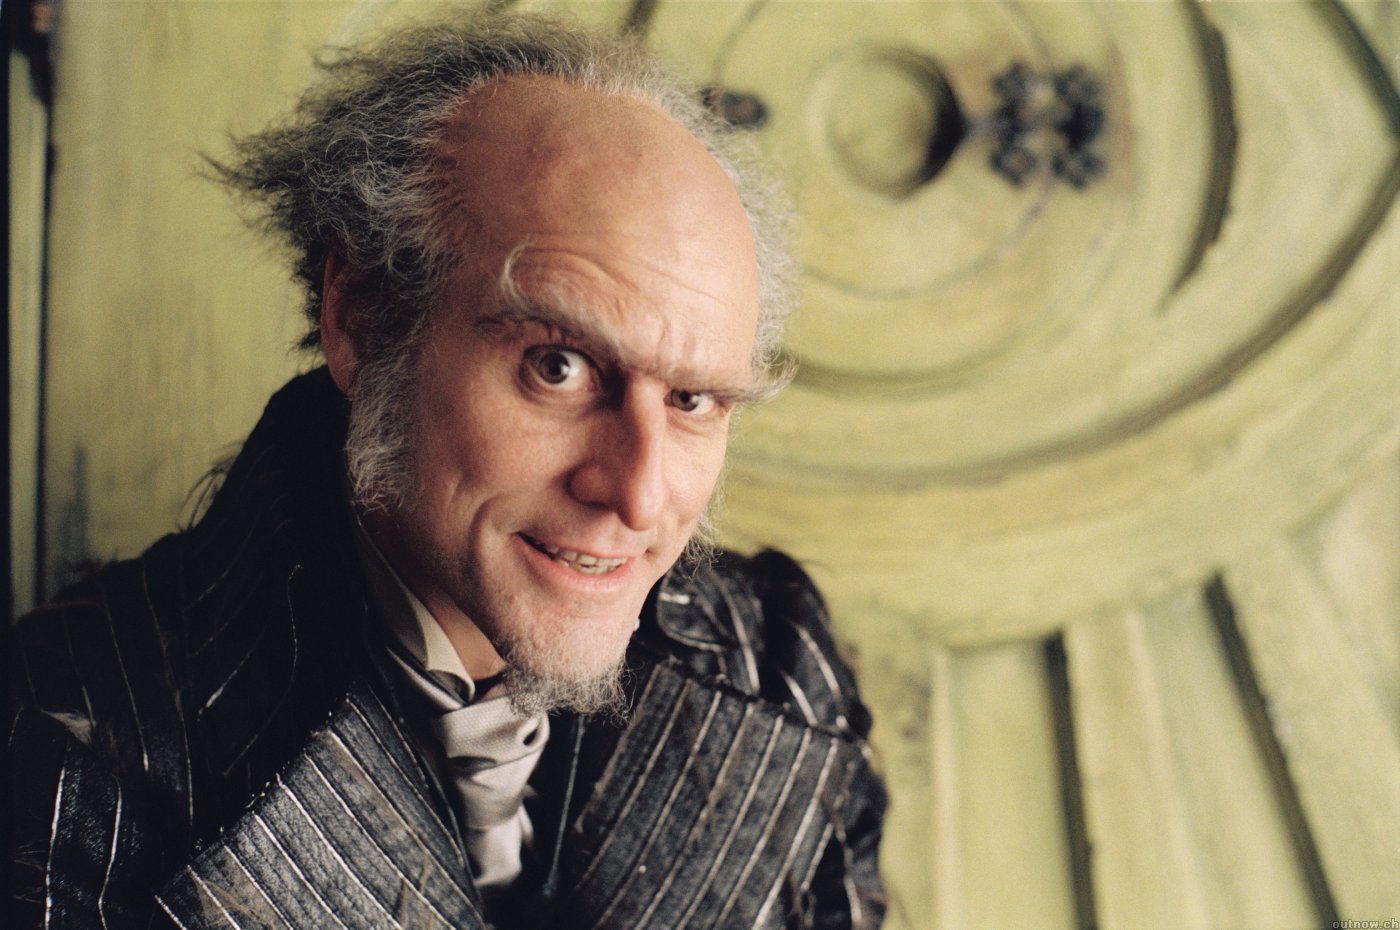 Jim Carrey in Lemony Snicket's A Series of Unfortunate Events